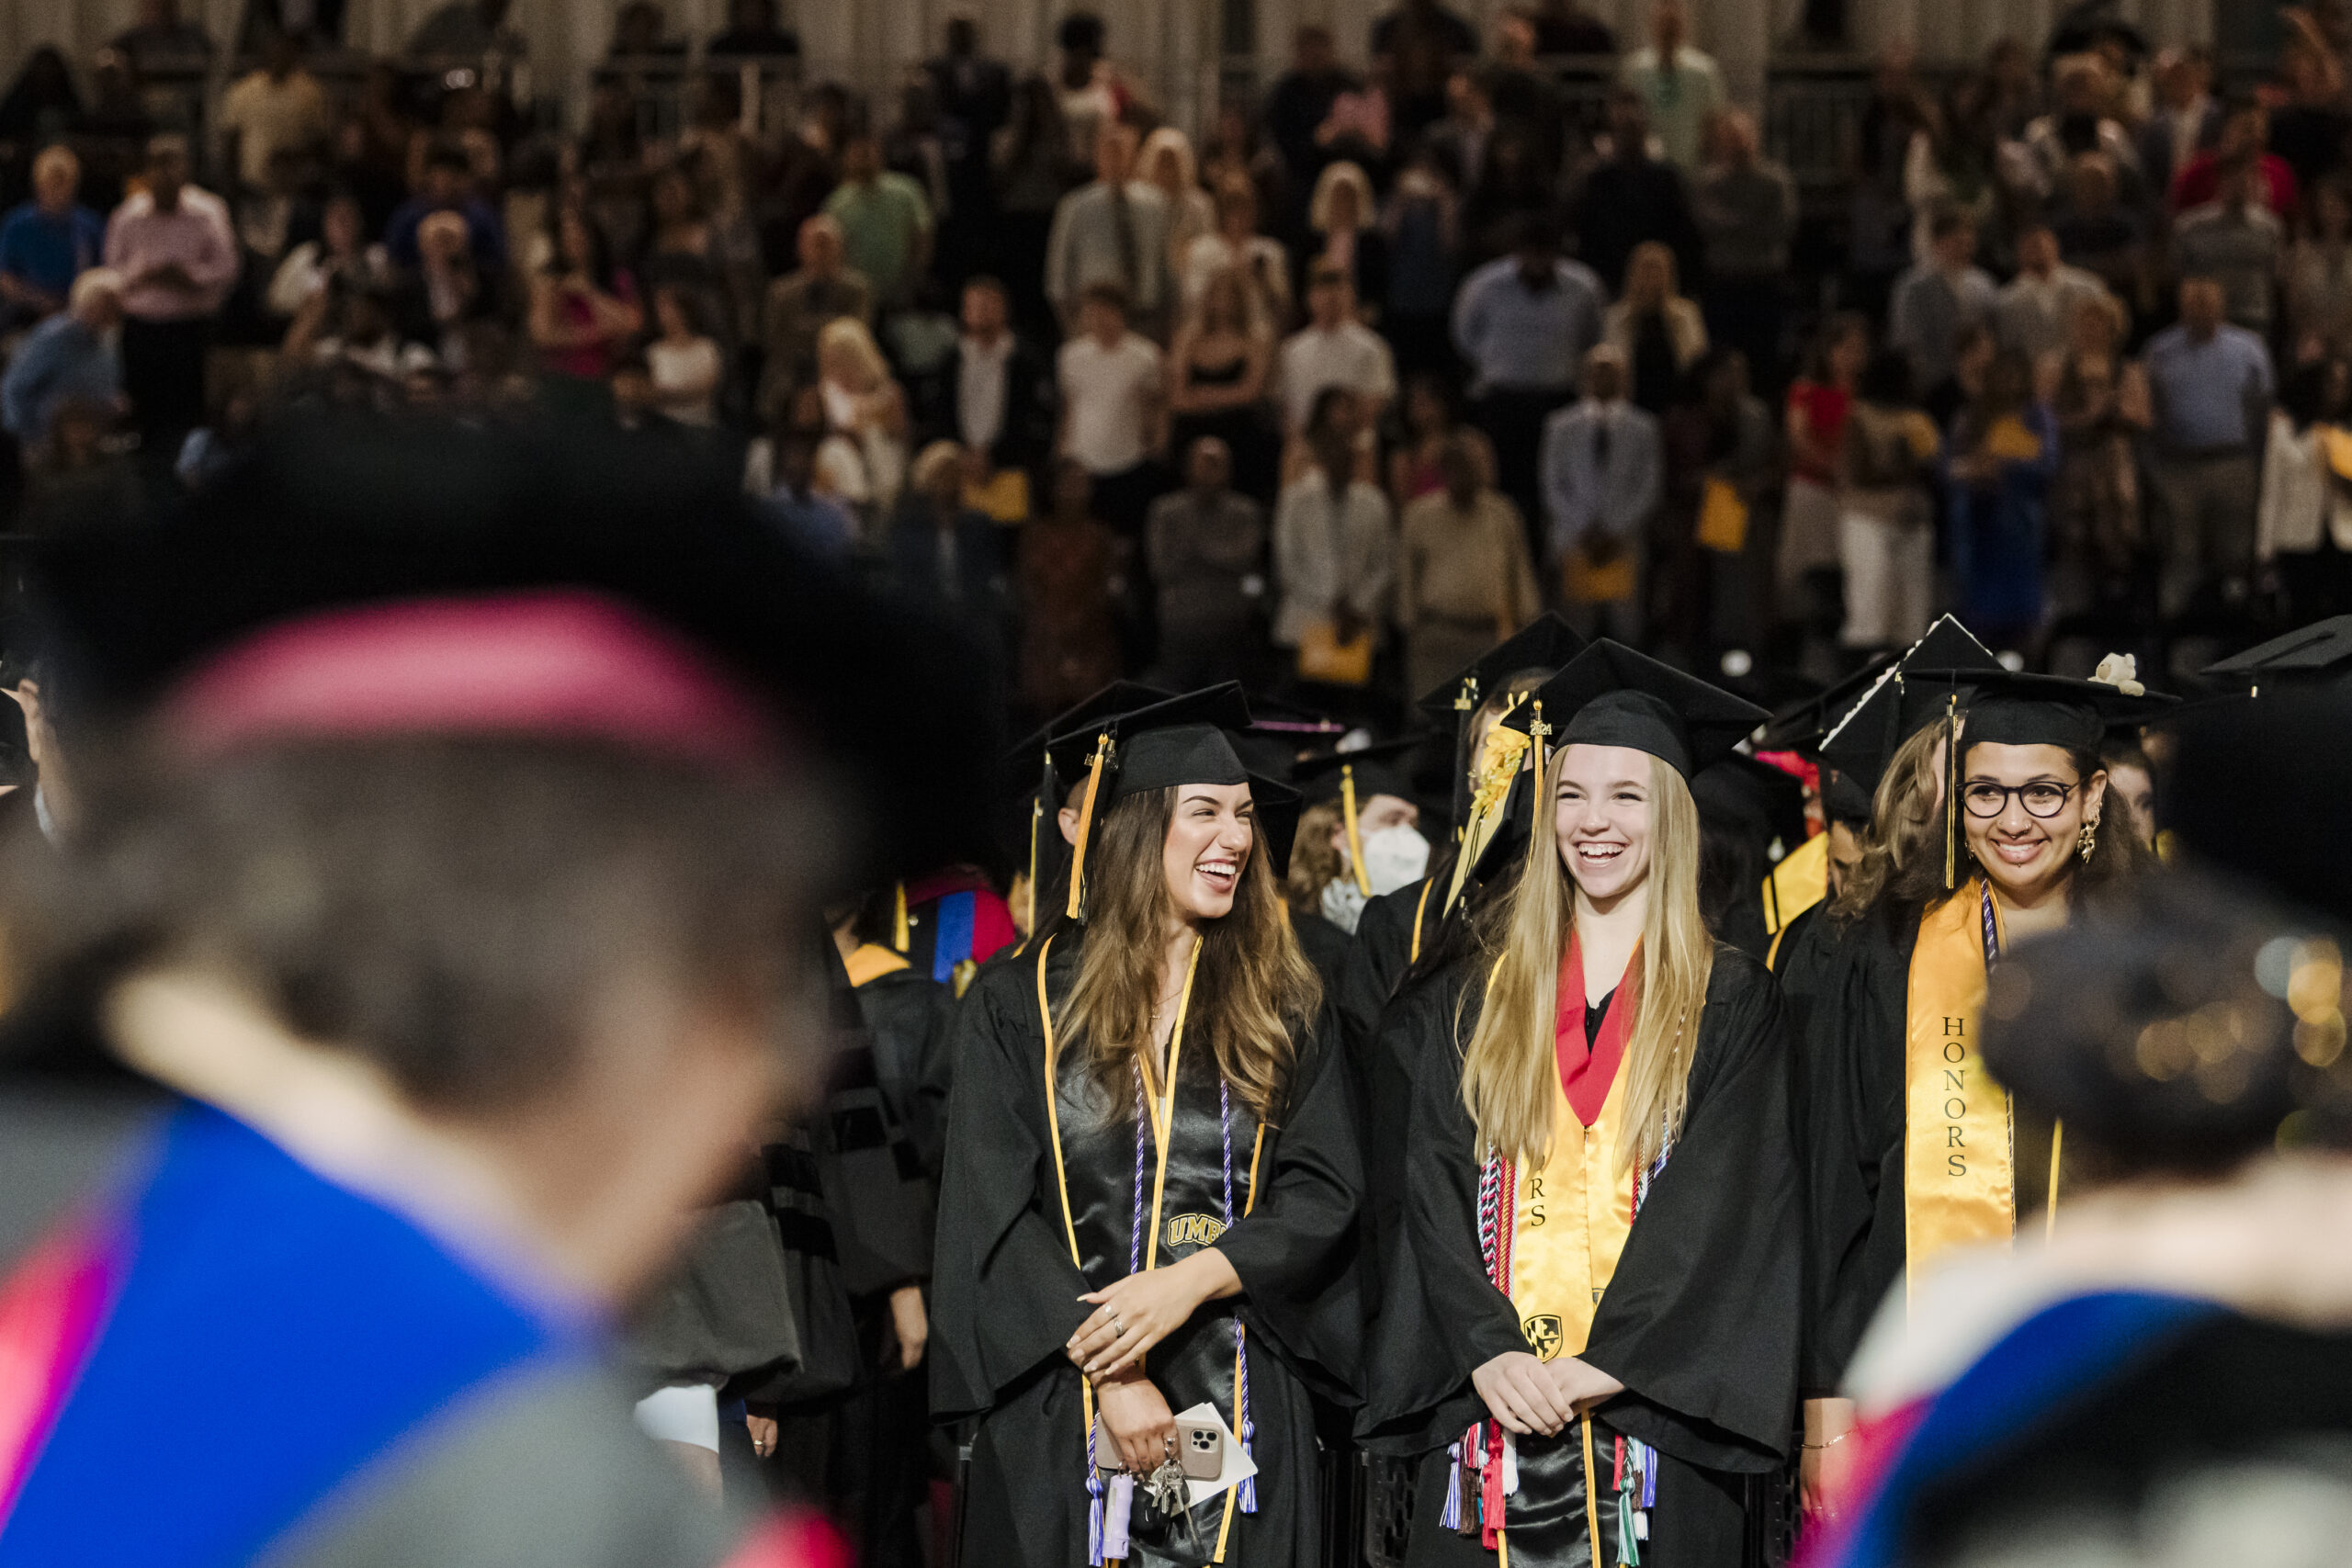 Three UMBC graduates during the Spring 2024 Commencement ceremony. The students are smiling while surrounded by the audience in the background.